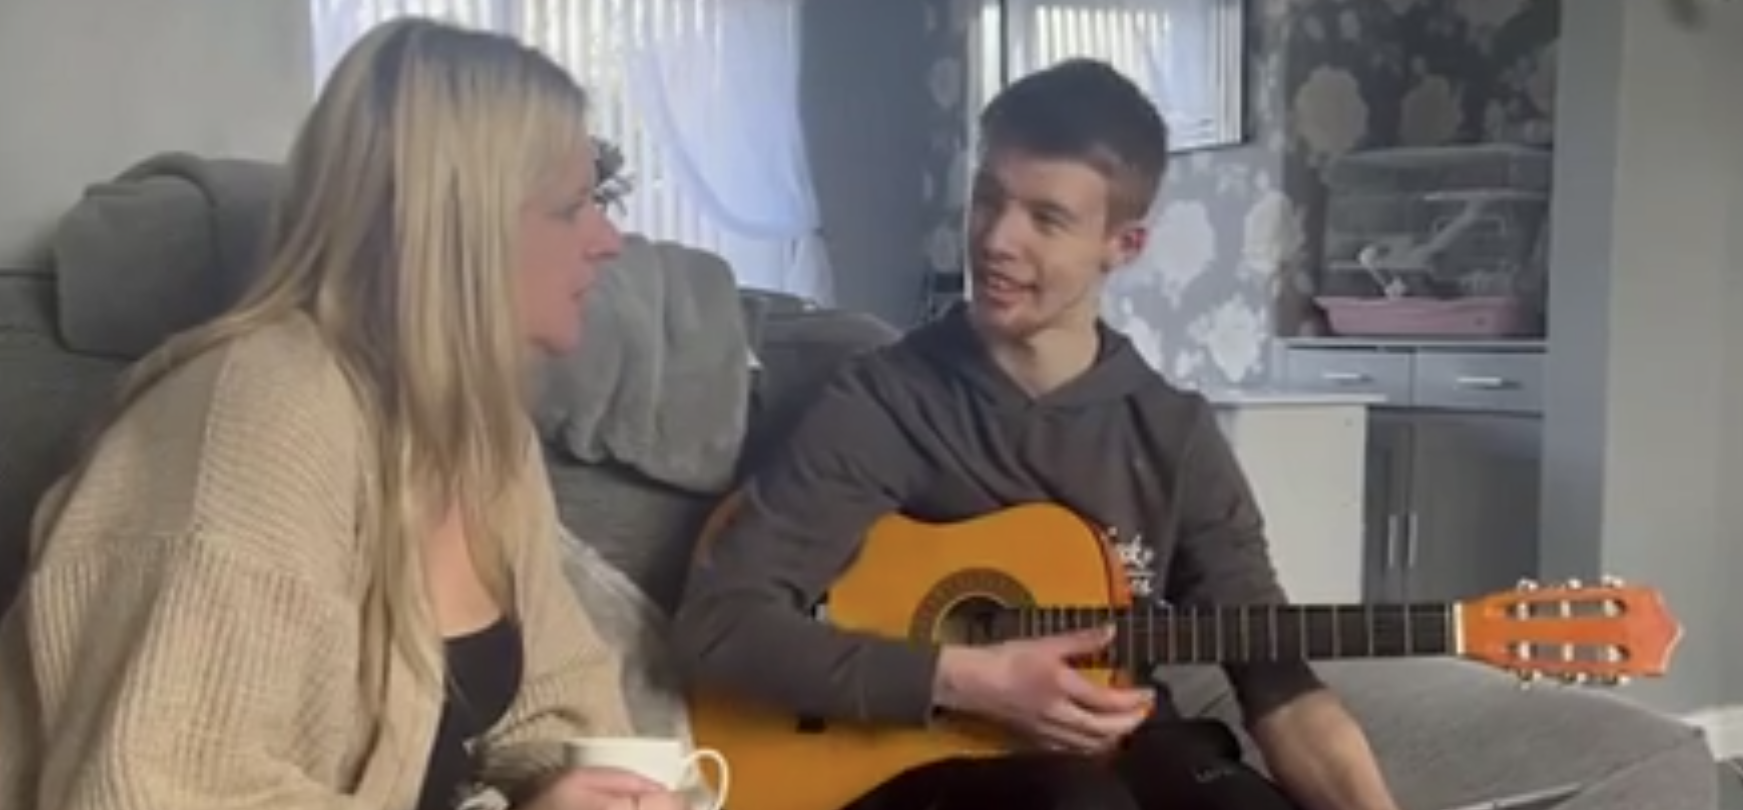 Sara, a blonde adult woman, sits with her back to the camera and her body turned to her teenaged son Josh, who is smiling and holding an acoustic guitar.